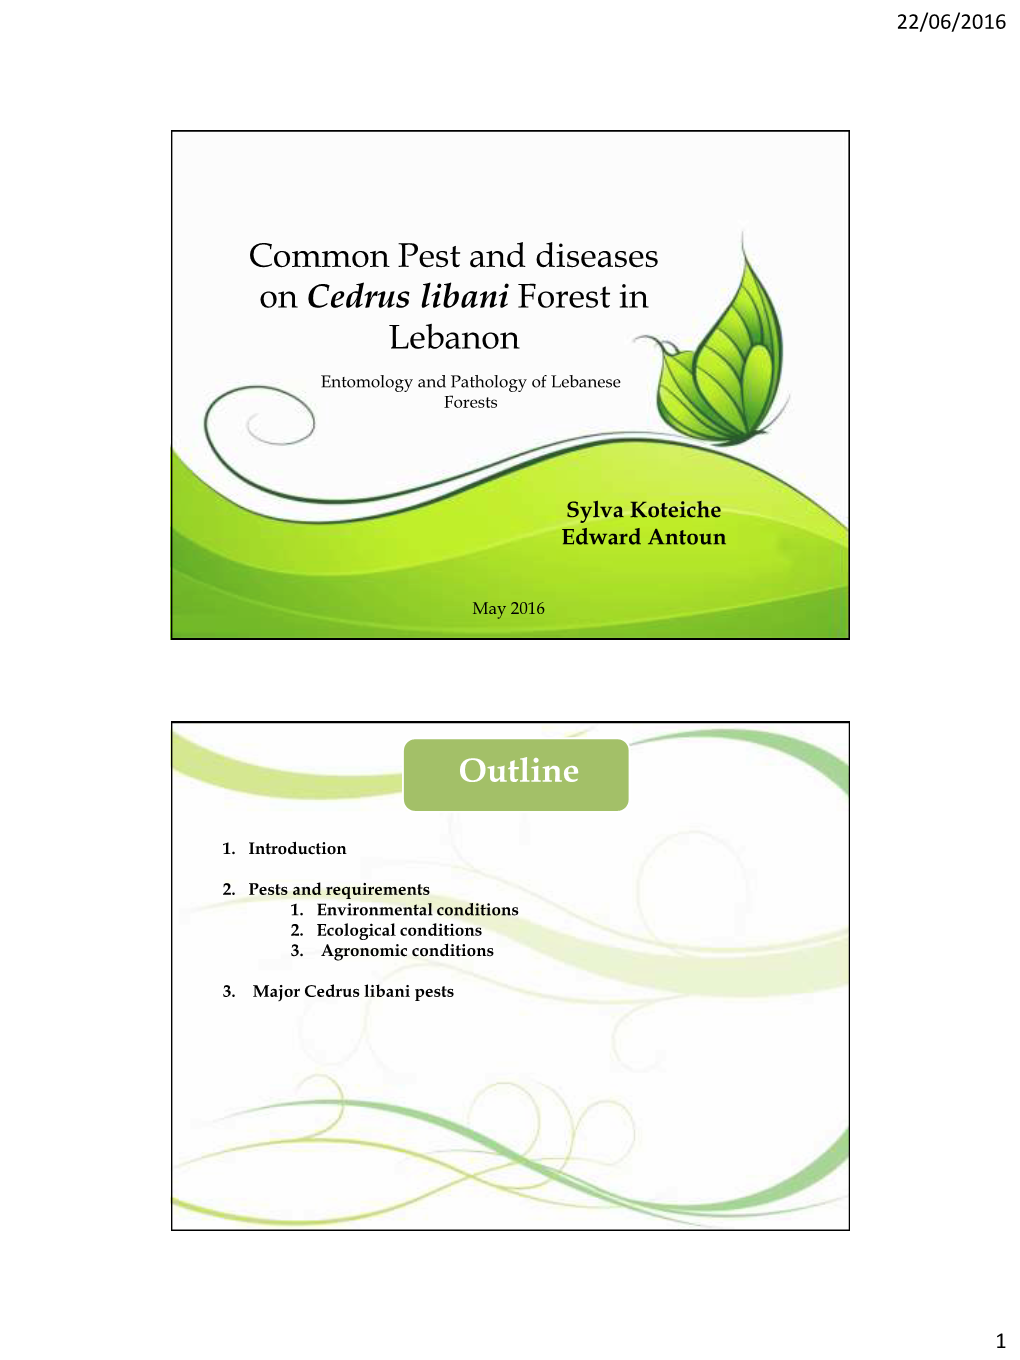 Common Pest and Diseases on Cedrus Libani Forest in Lebanon